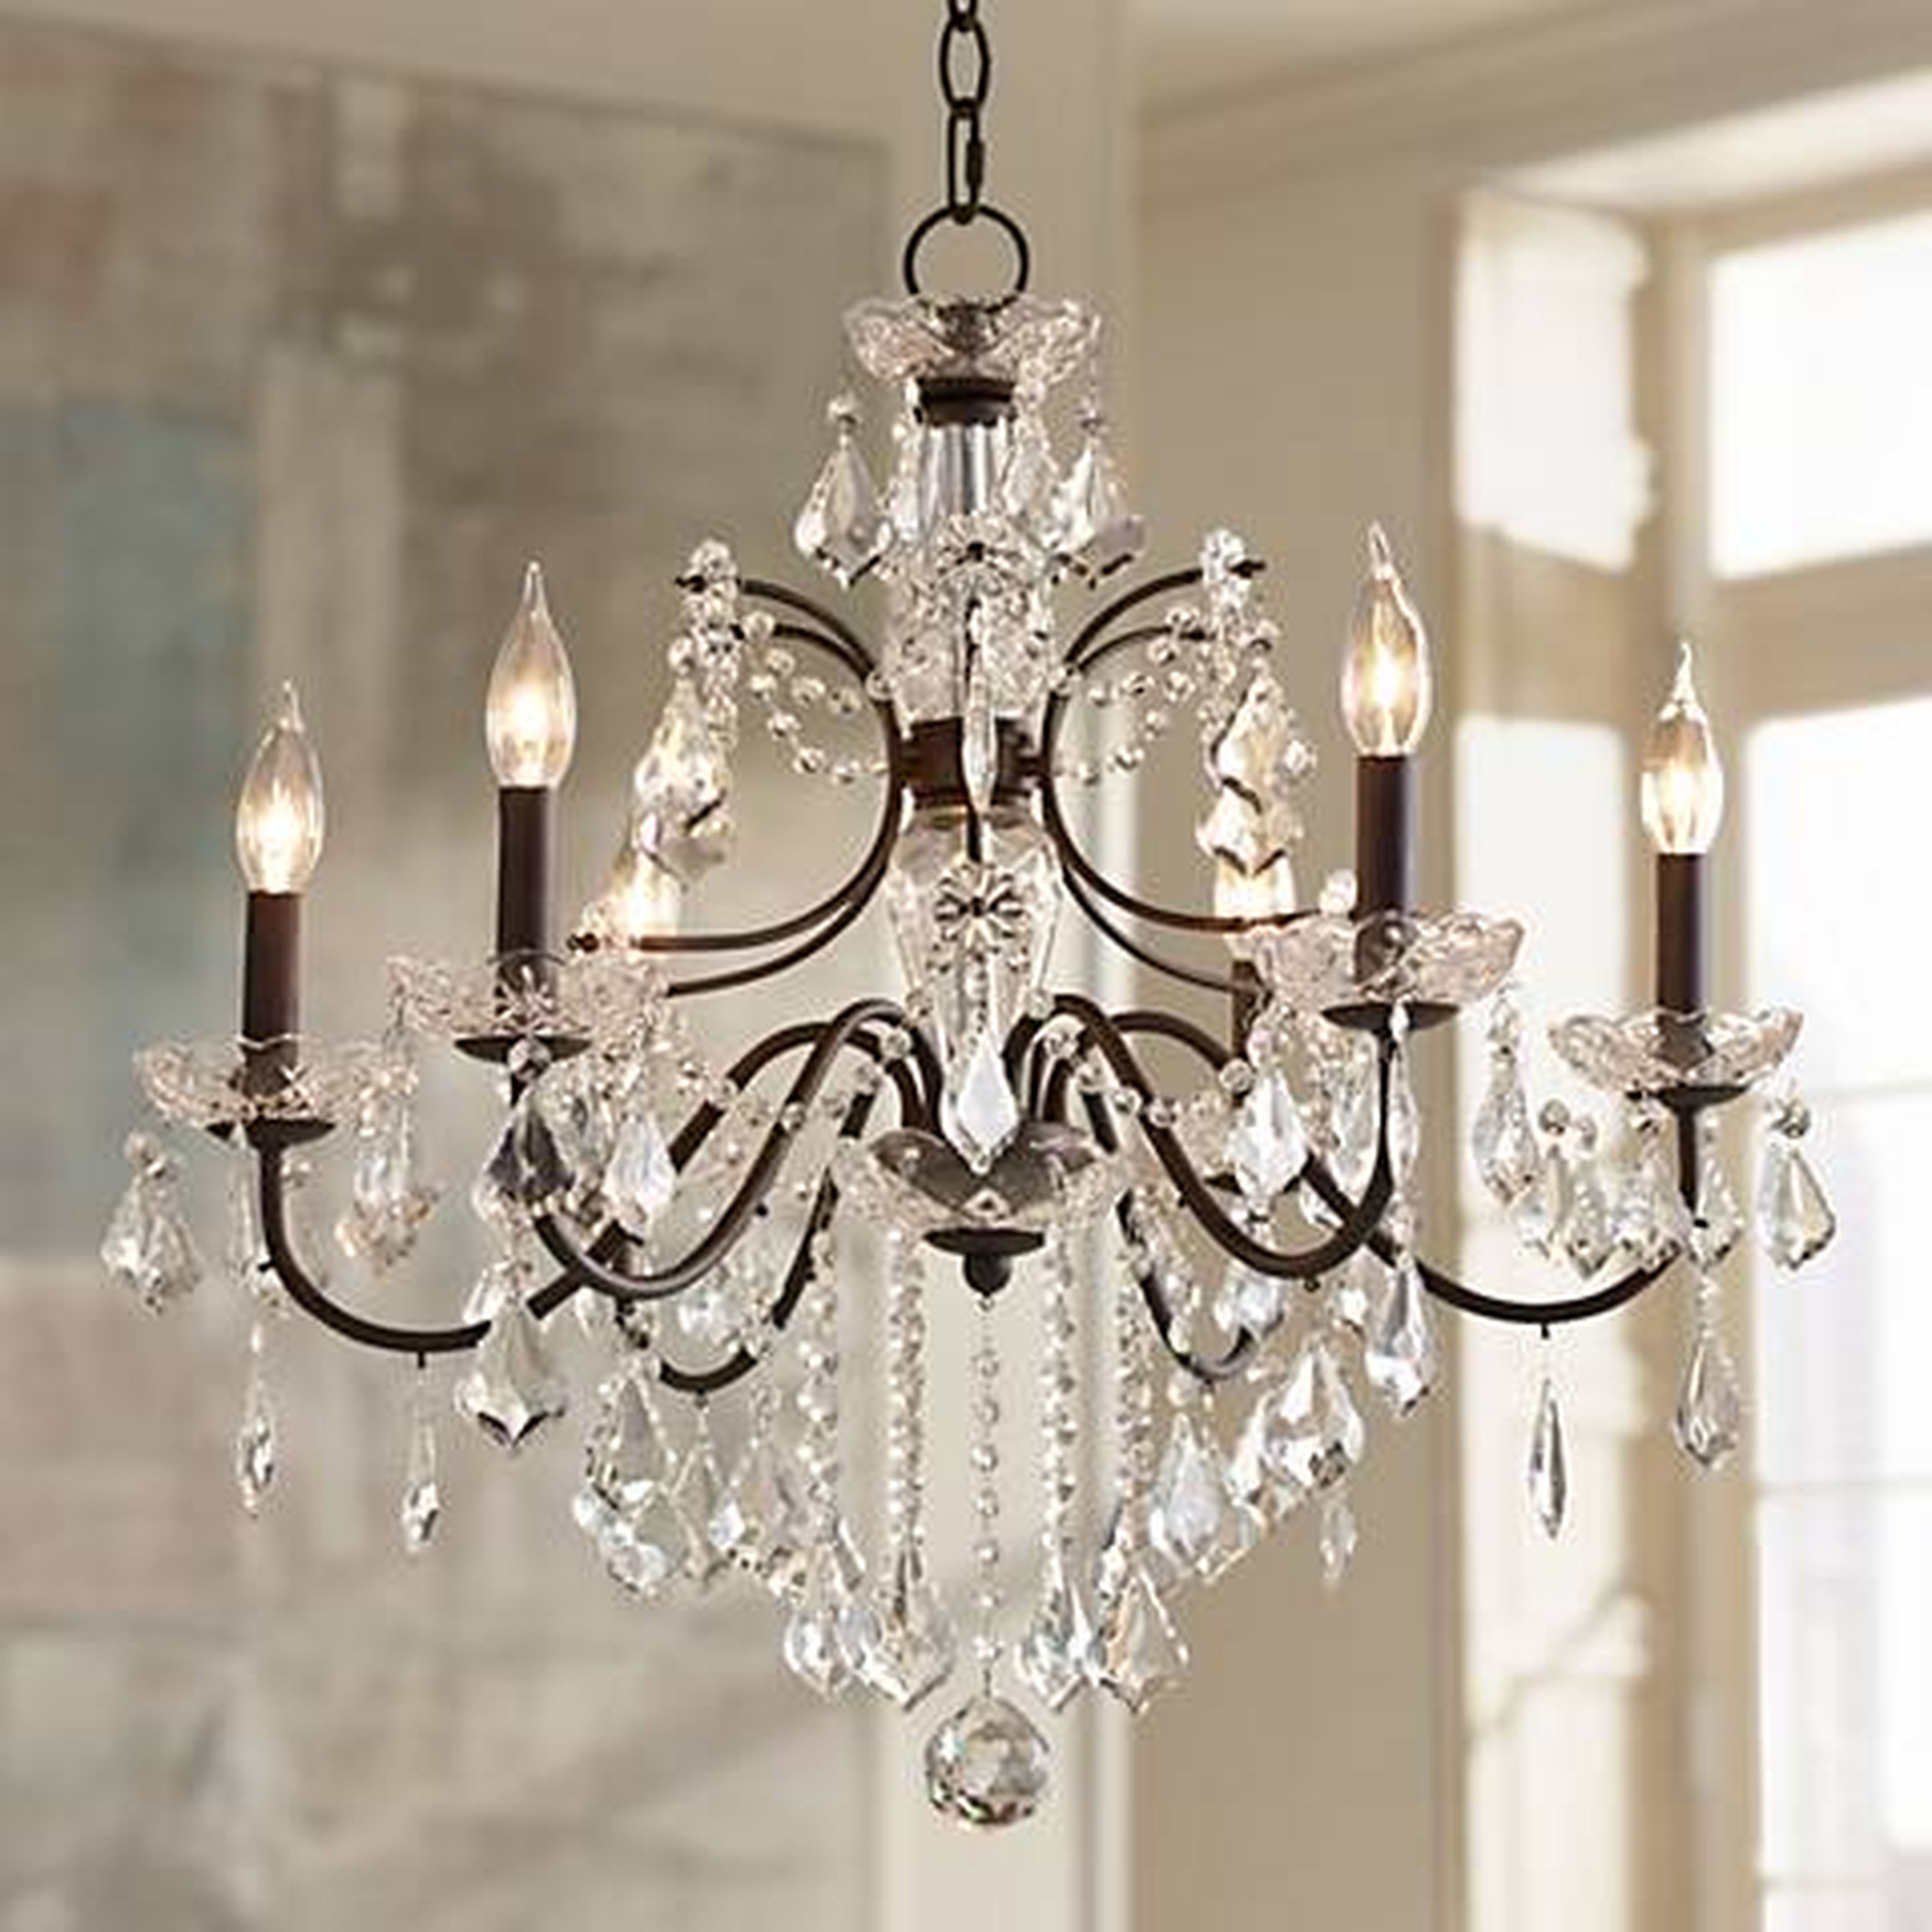 Beverly 26" Wide Crystal Chandelier - Lamps Plus